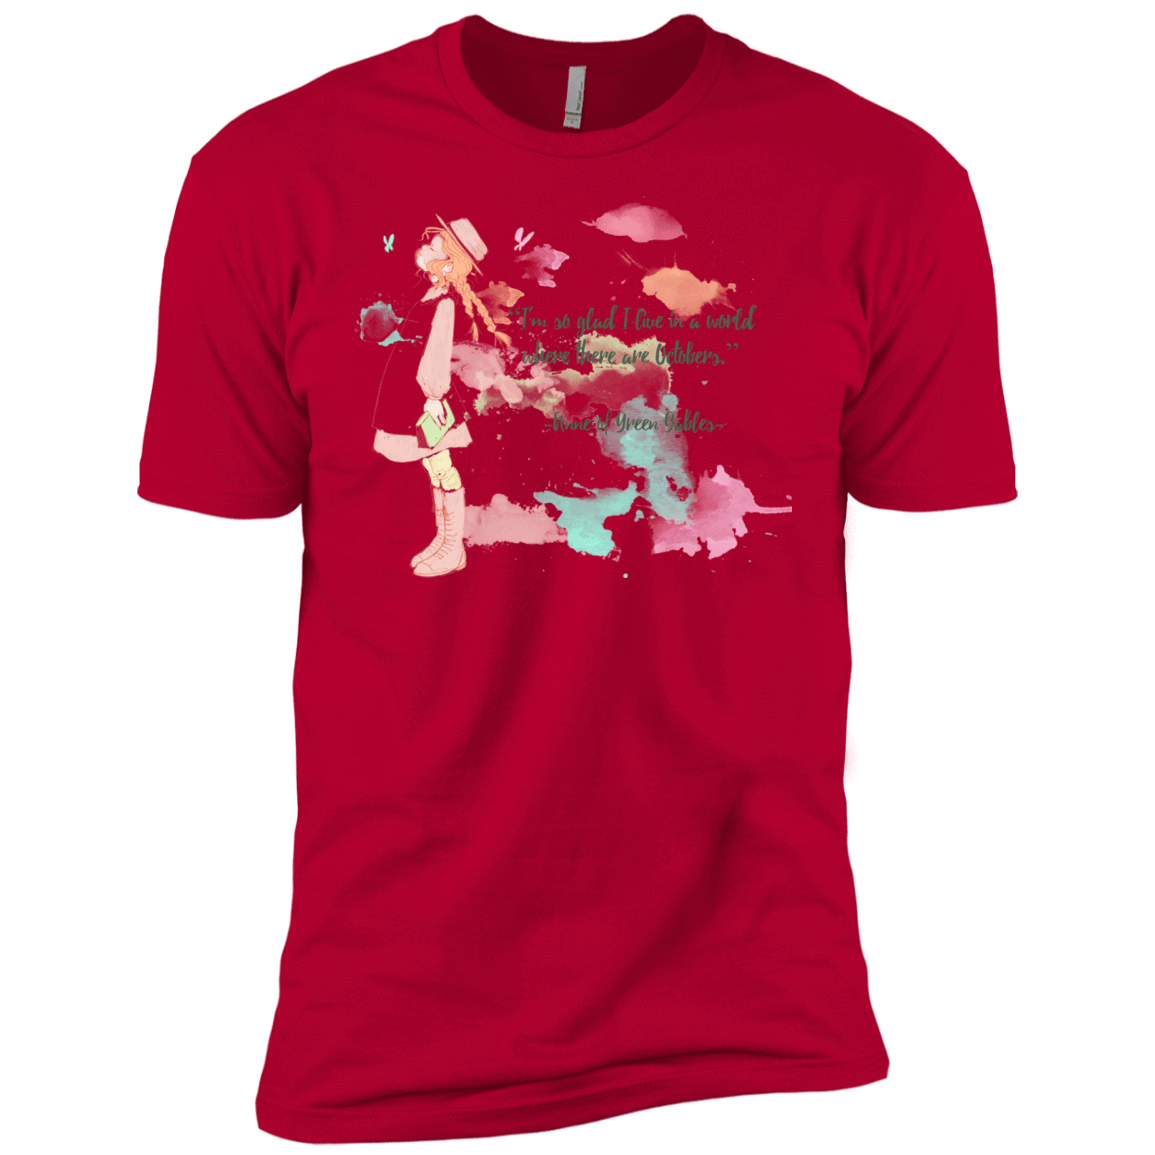 T-Shirts Red / X-Small Anne of Green Gables 2 Men's Premium T-Shirt